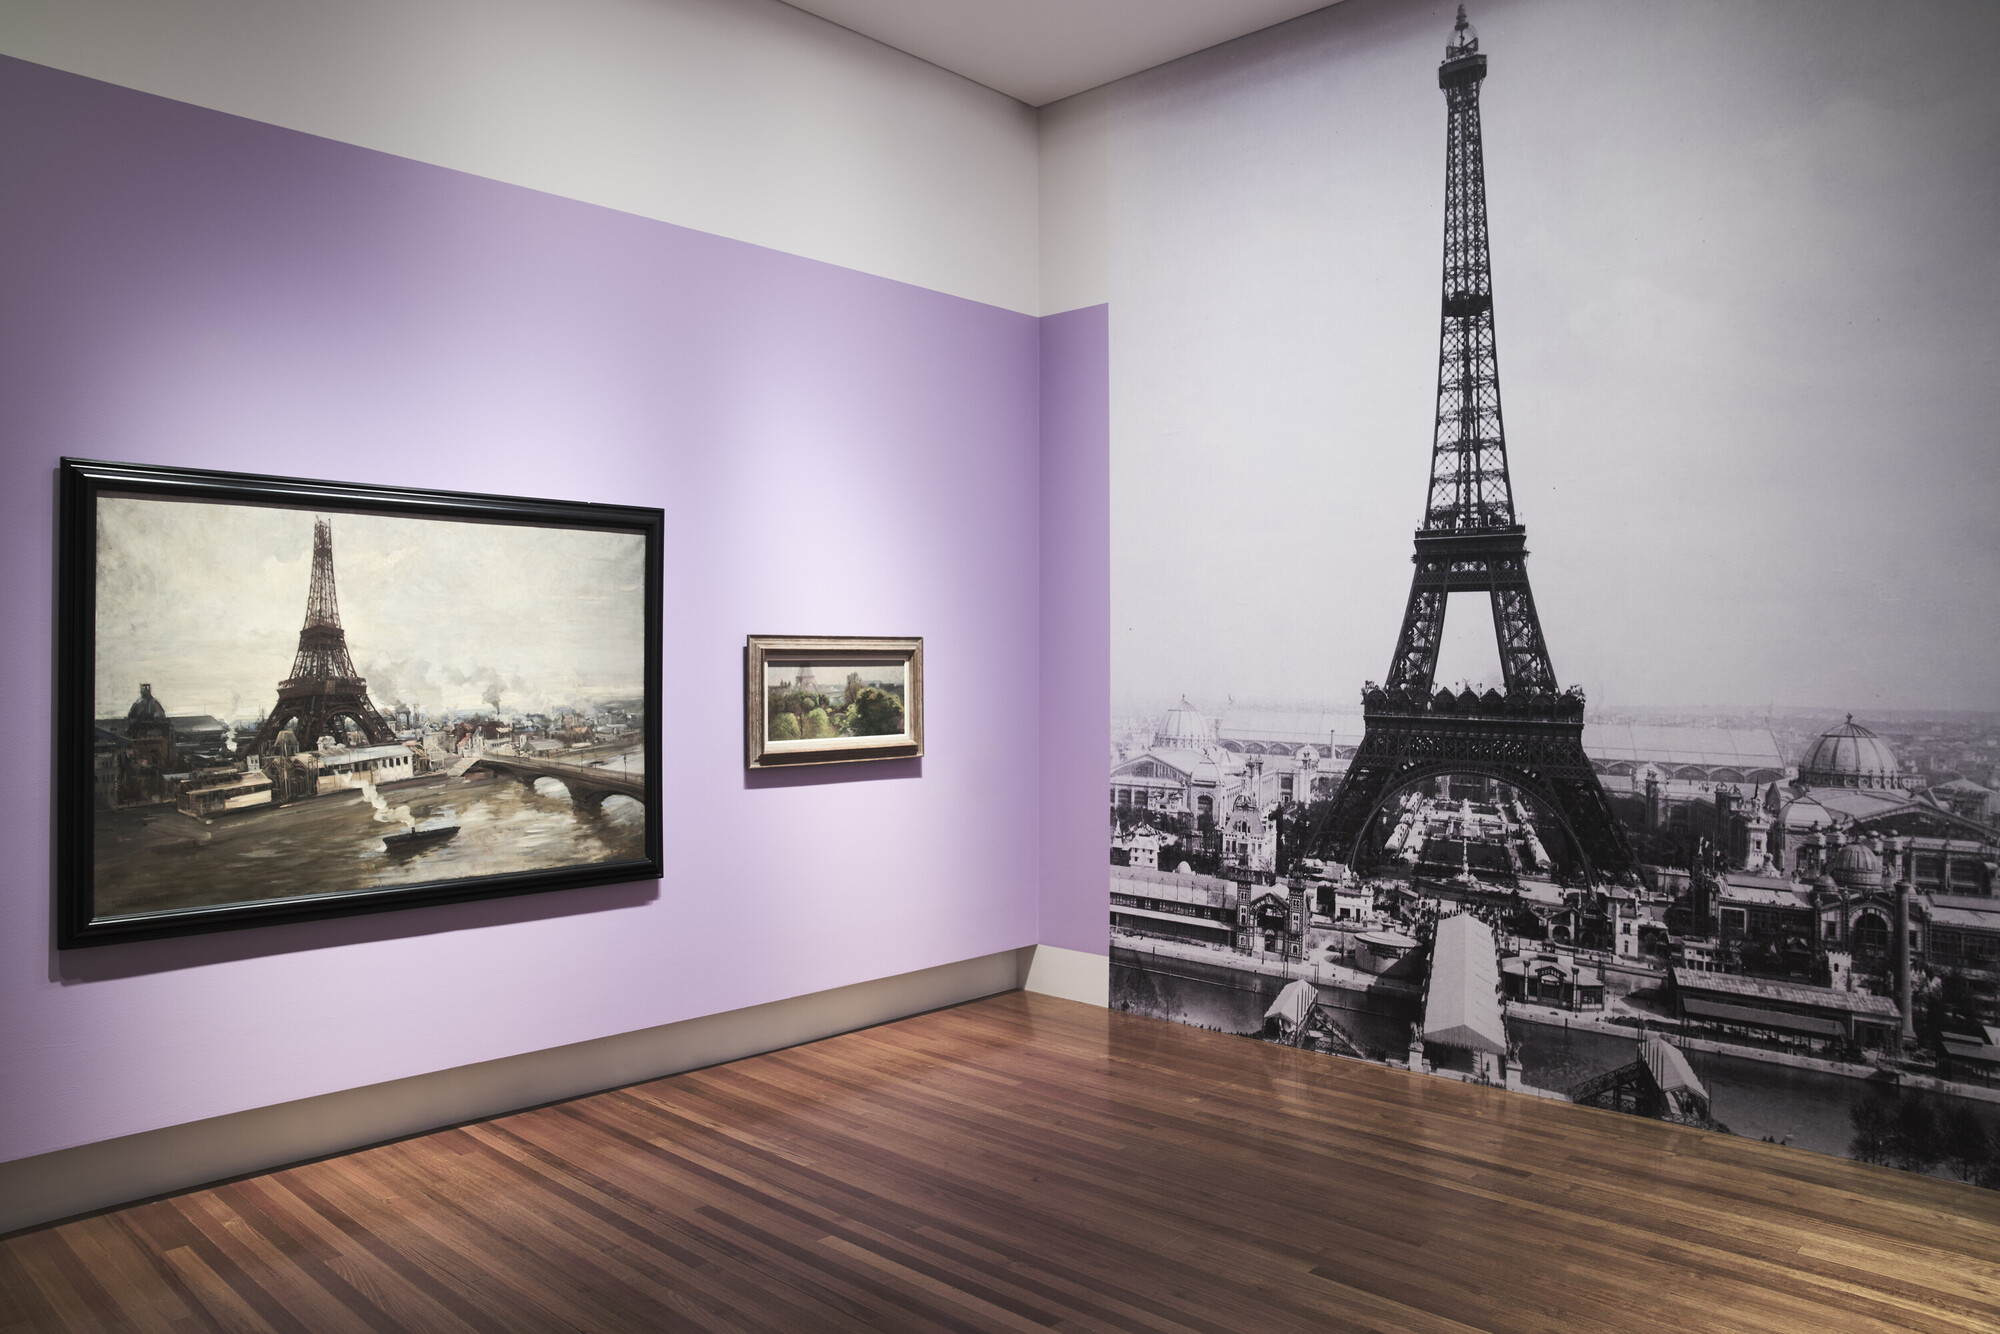 <p>Installation view The Universal Exhibition and the Eiffel Tower, themed room in Paris: Impressions of Life 1880–1925. Image courtesy Bendigo Art Gallery. Photo: Leon Schoots</p>